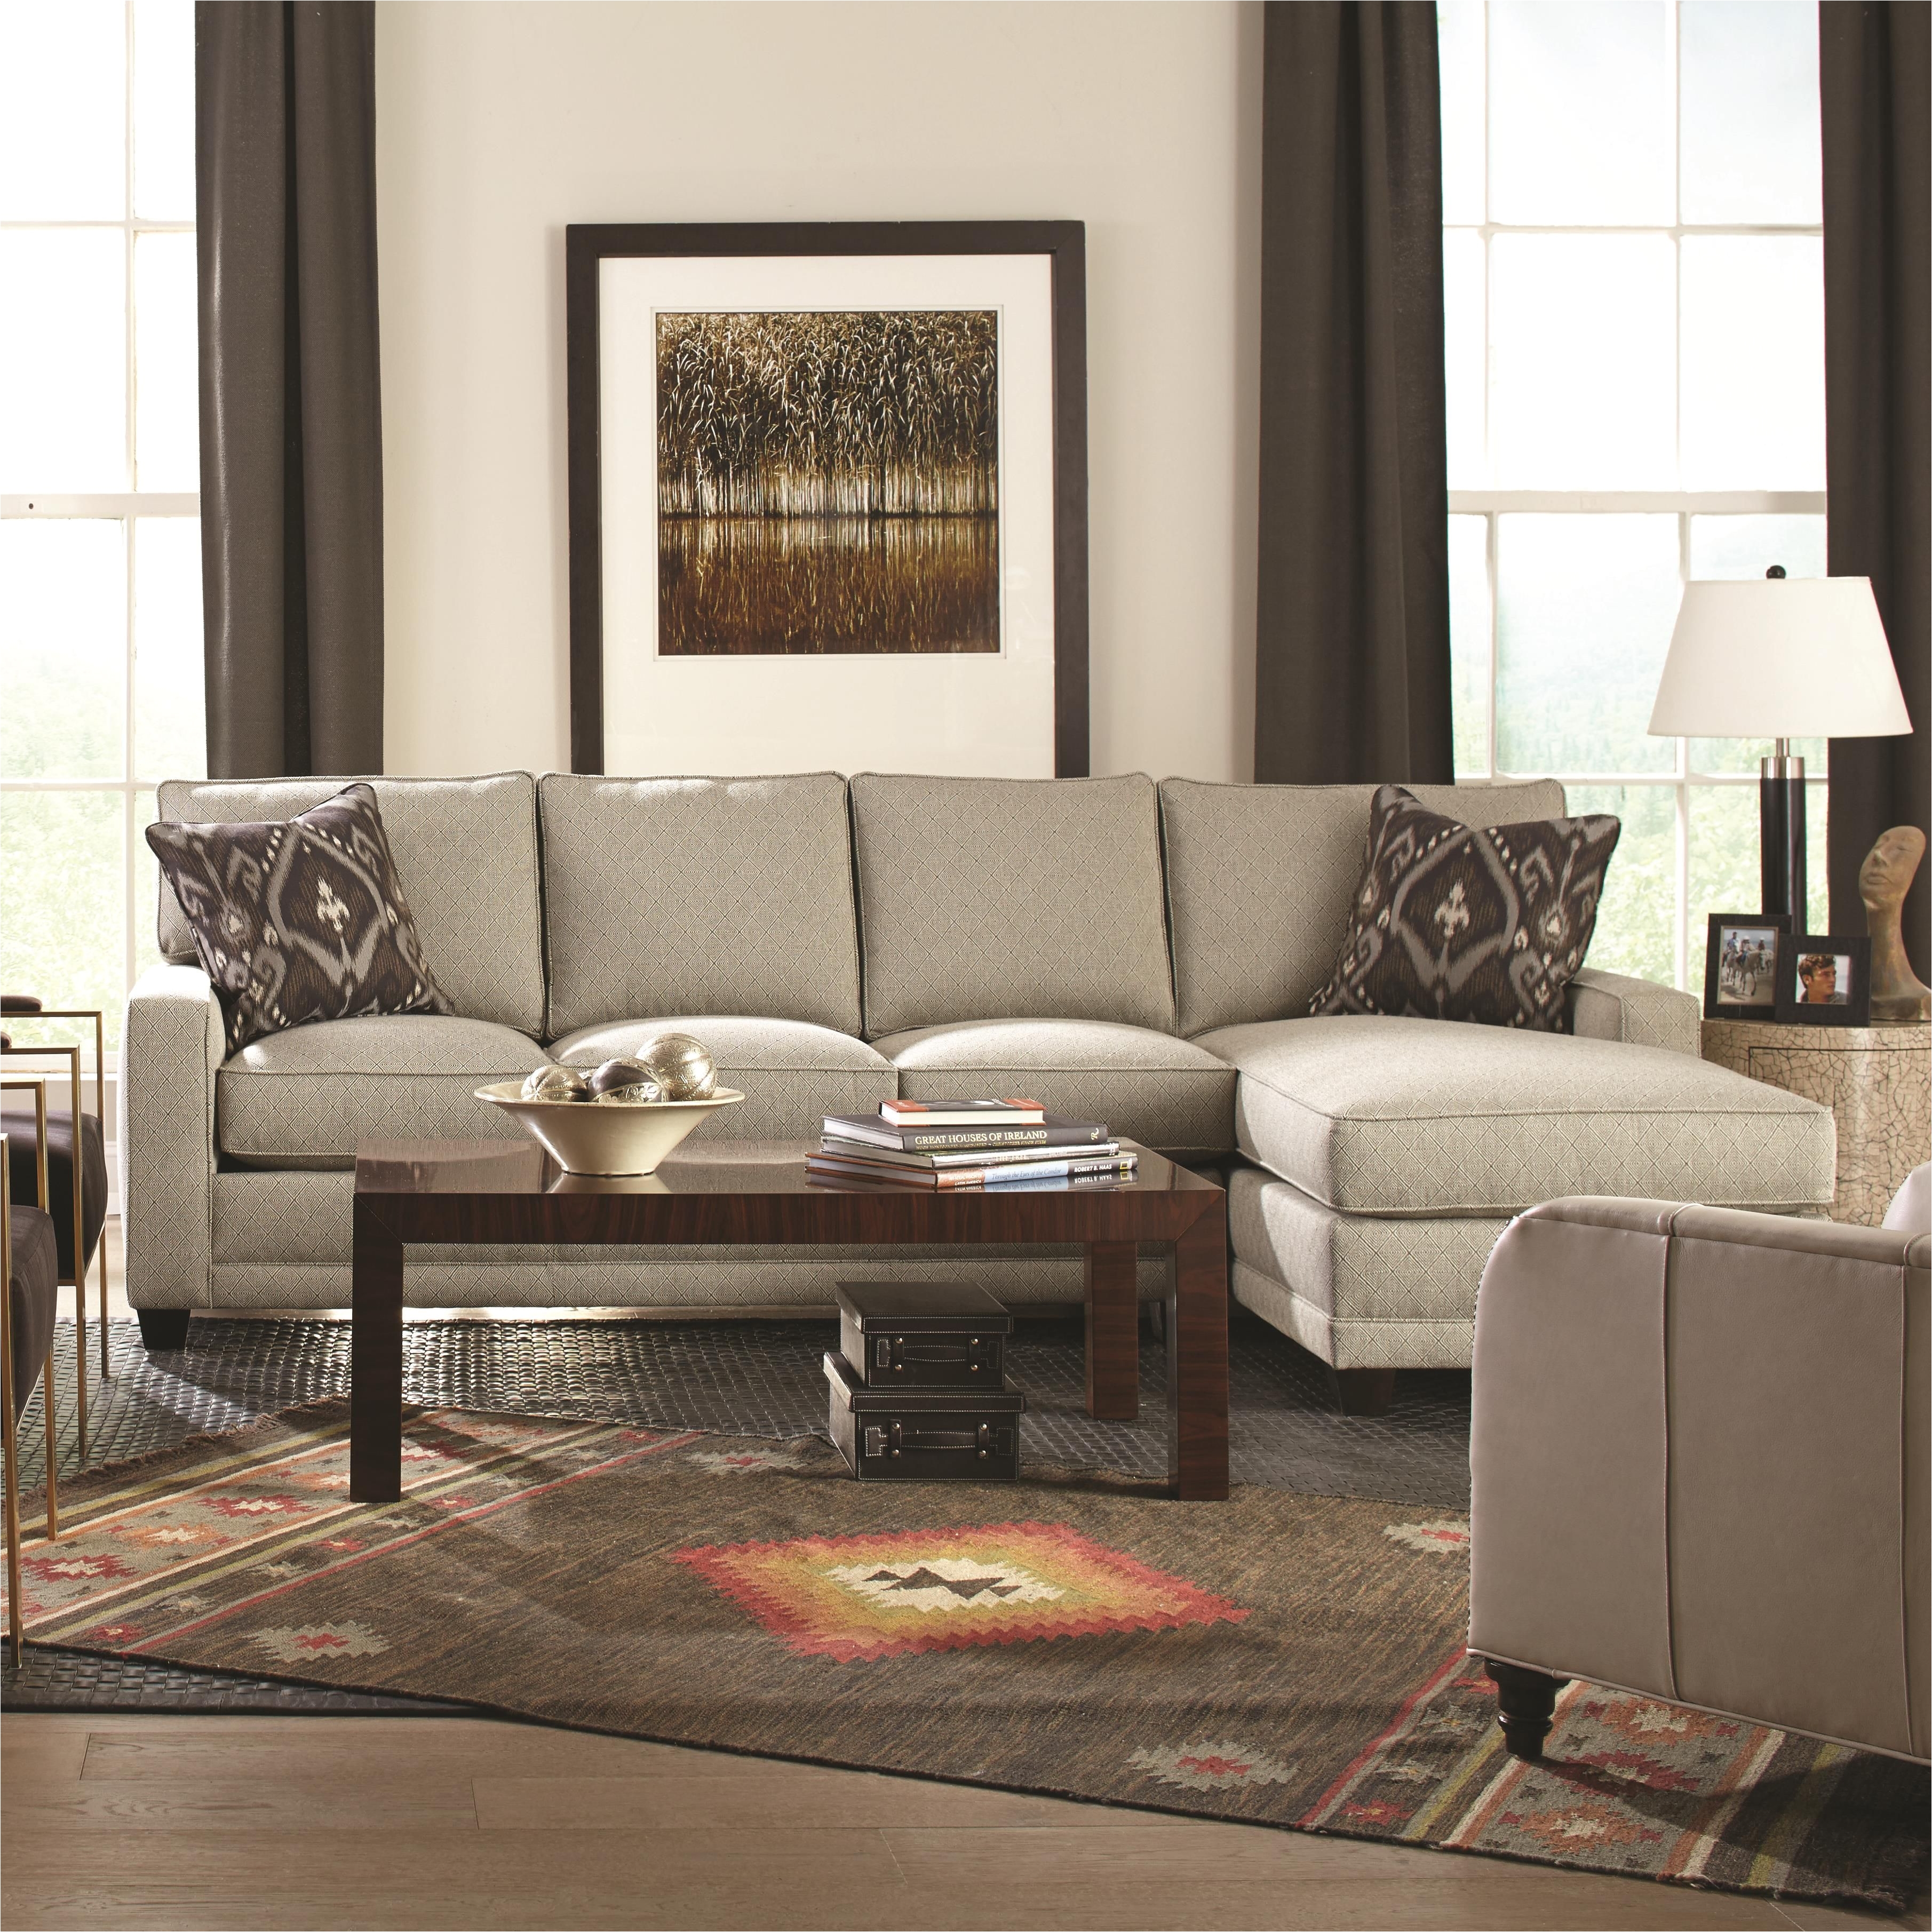 www livingspaces com furniture ideas my style contemporary sectional sofa with chaise by rowe